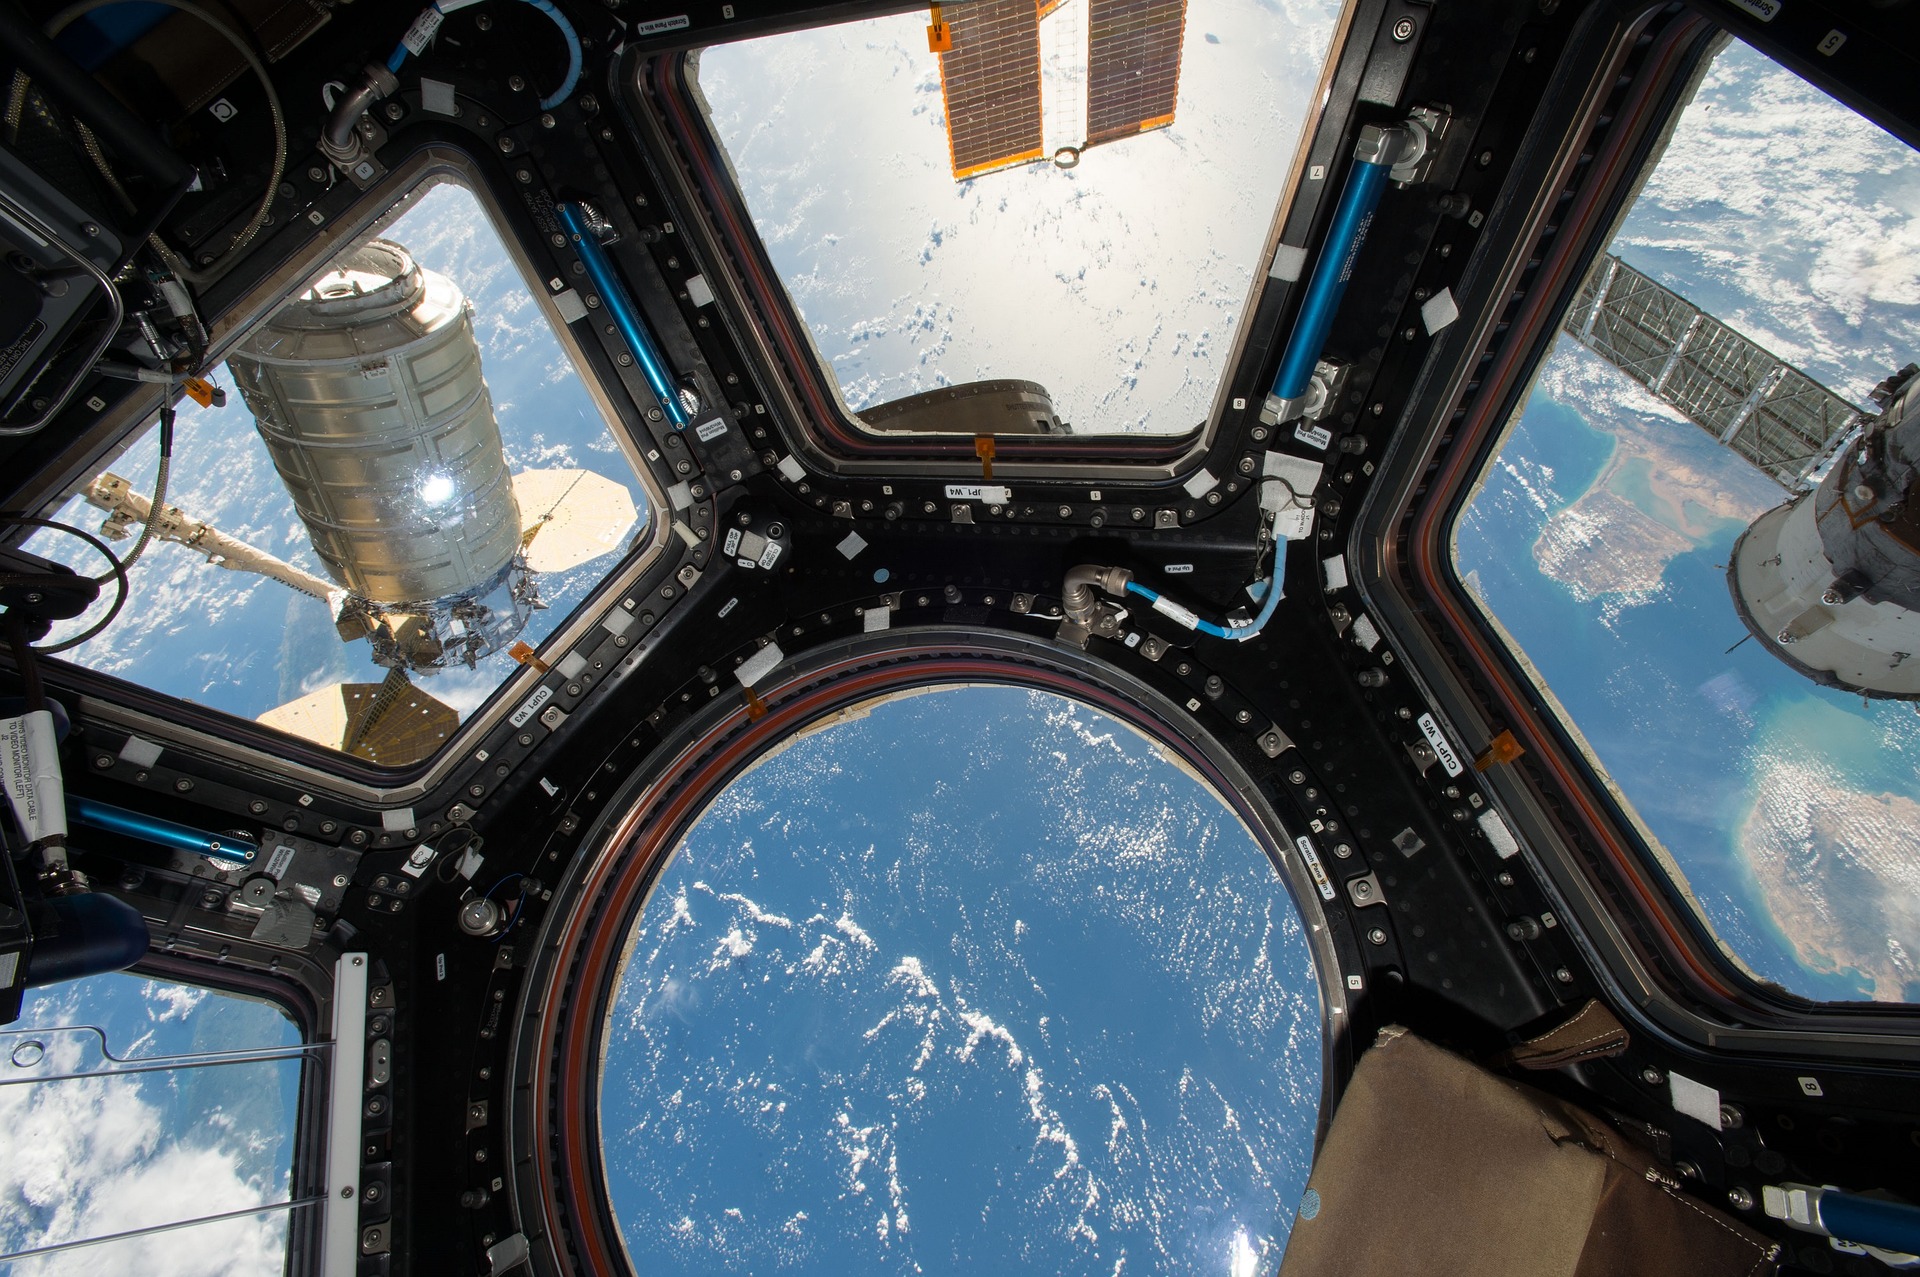 KNF’s space-worthy liquid pumps are part of a new Life Support Rack for the ISS.